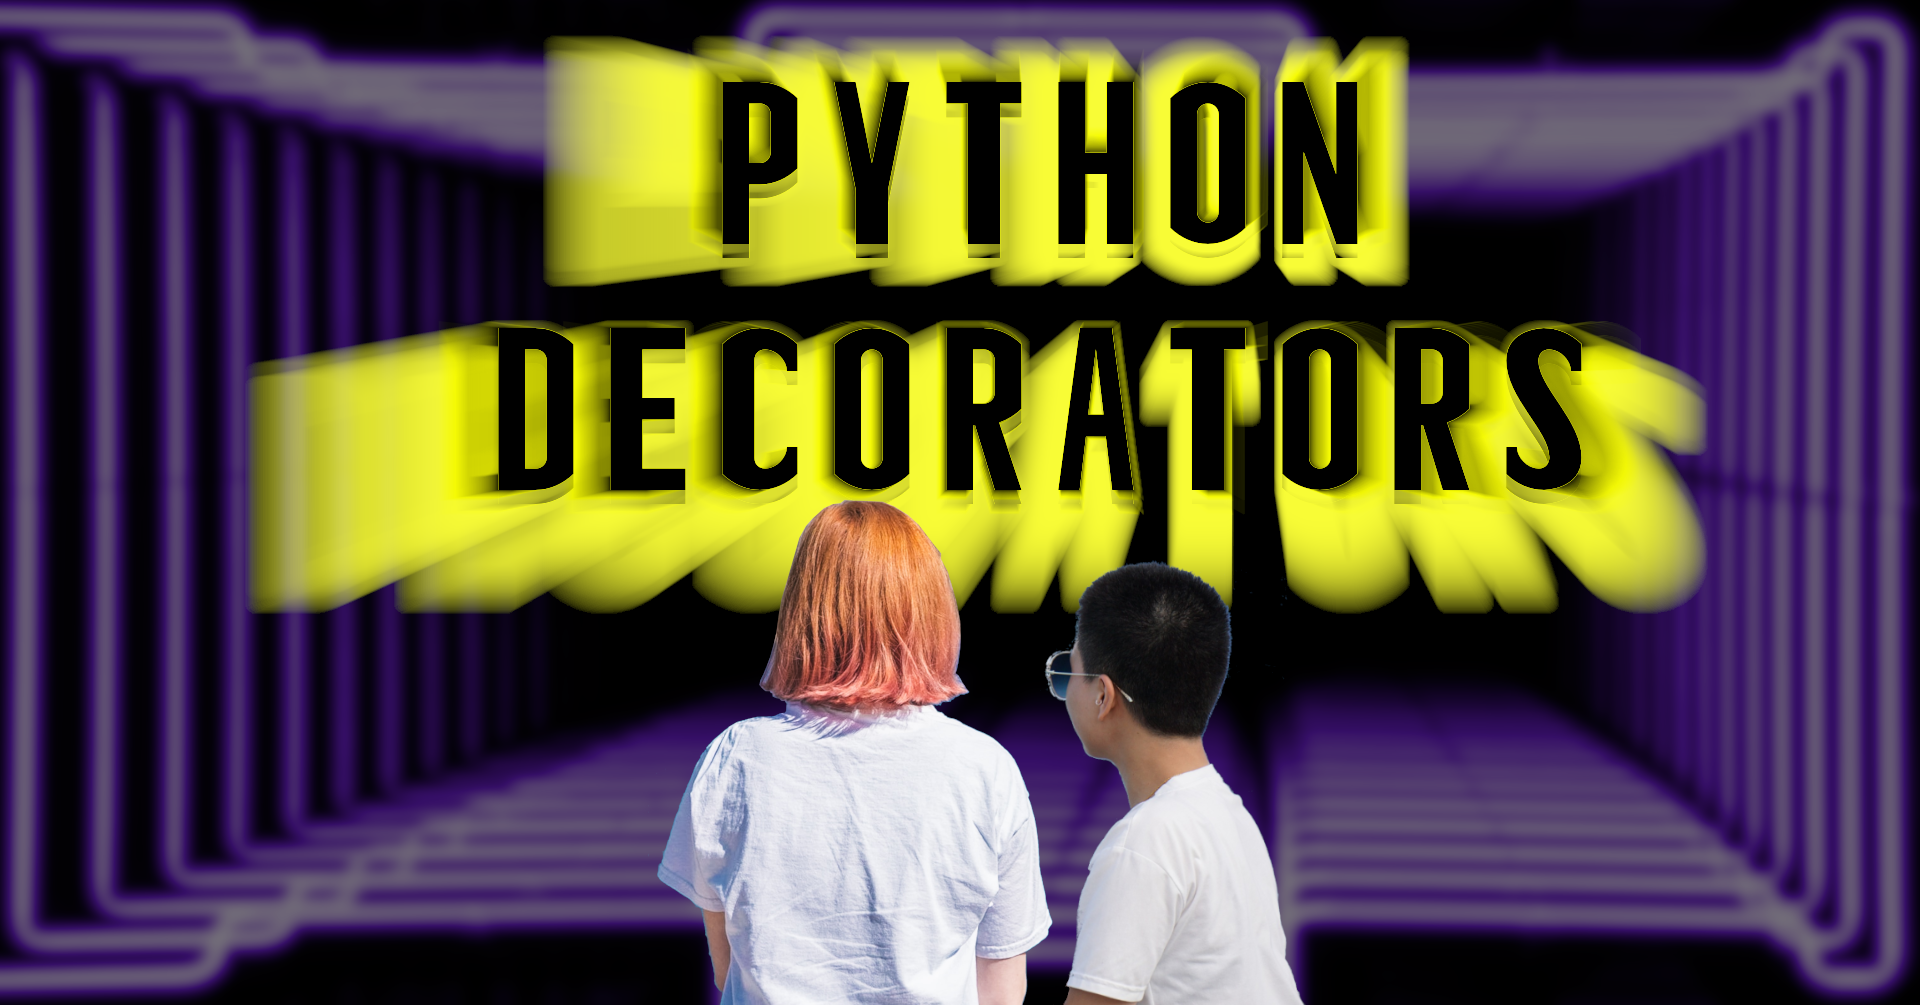 Python Decorators – How to Create and Use Decorators in Python With Examples